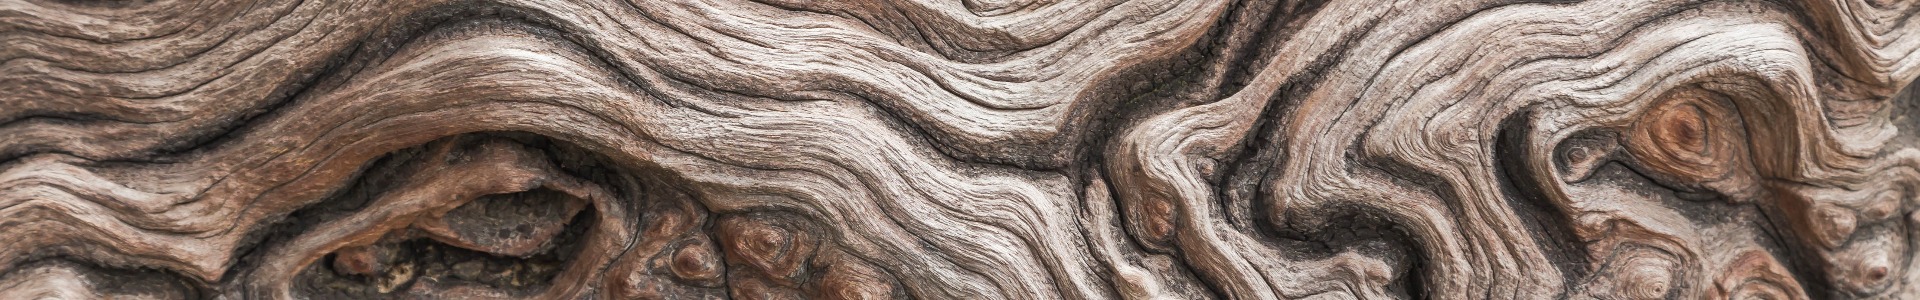 close up old aged wooden texture abstract background